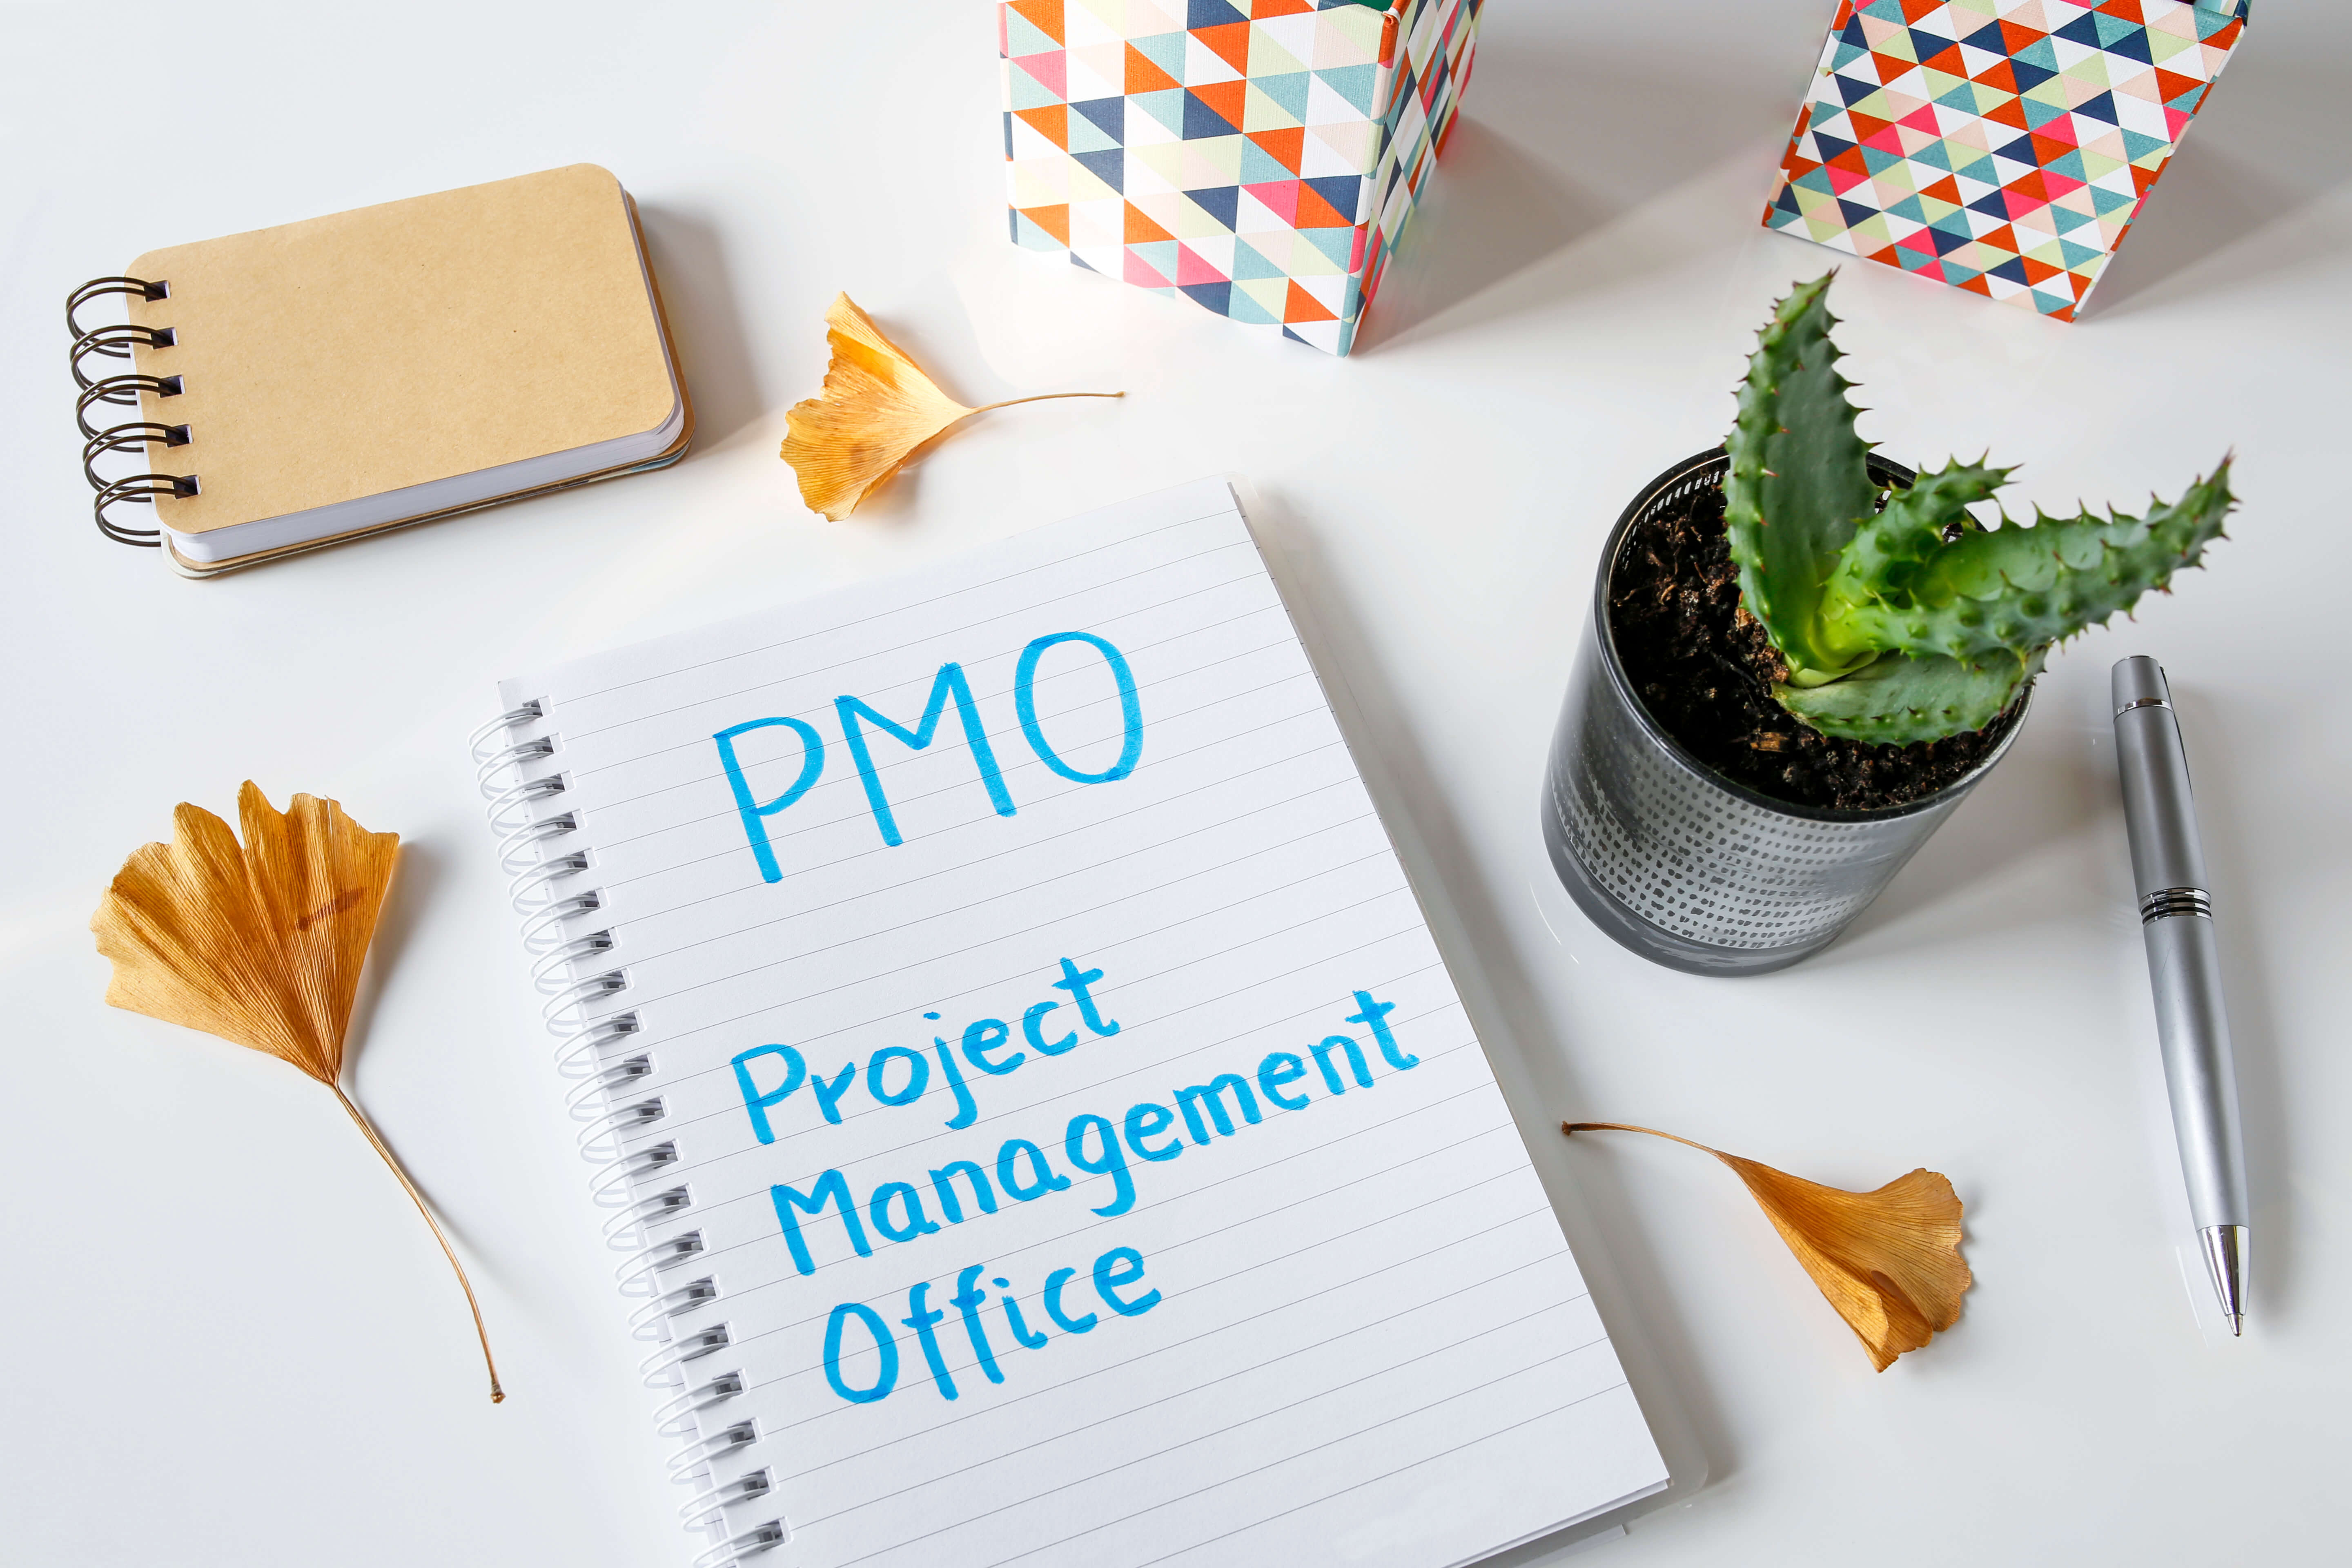 Considerations for types of PMO